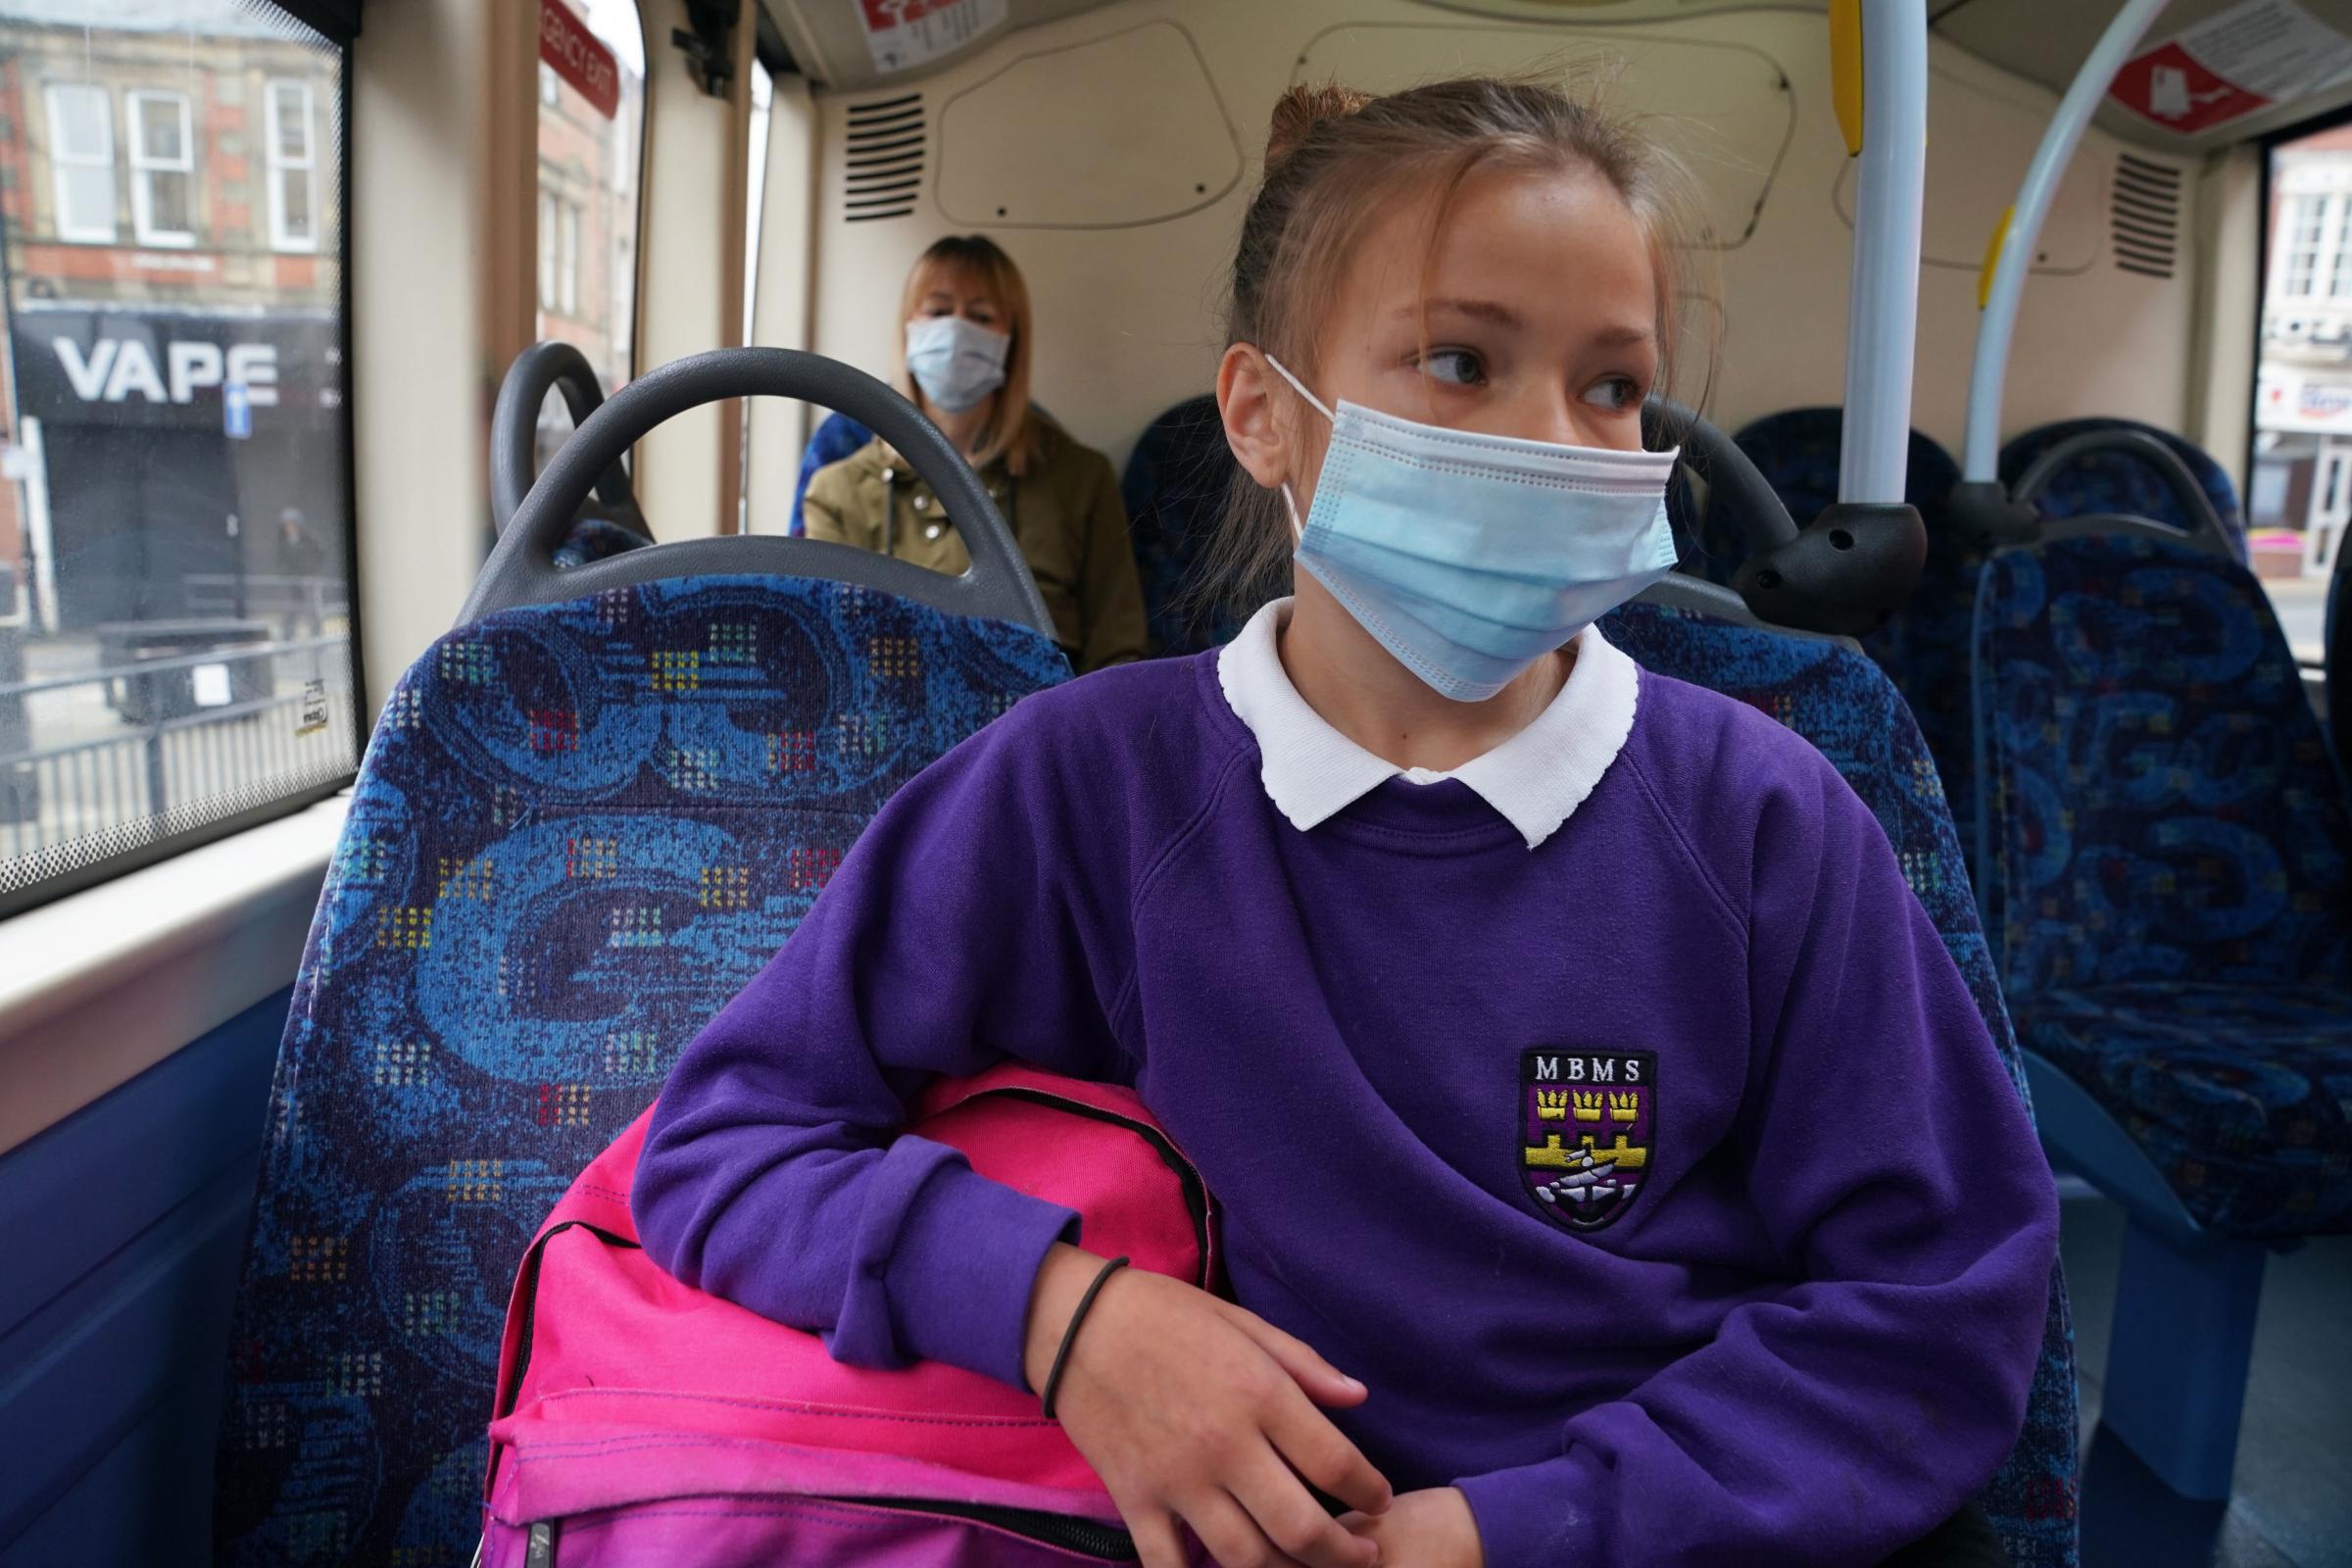 School pupil wearing a face mask. Photo credit Owen Humphreys/PA Wire.